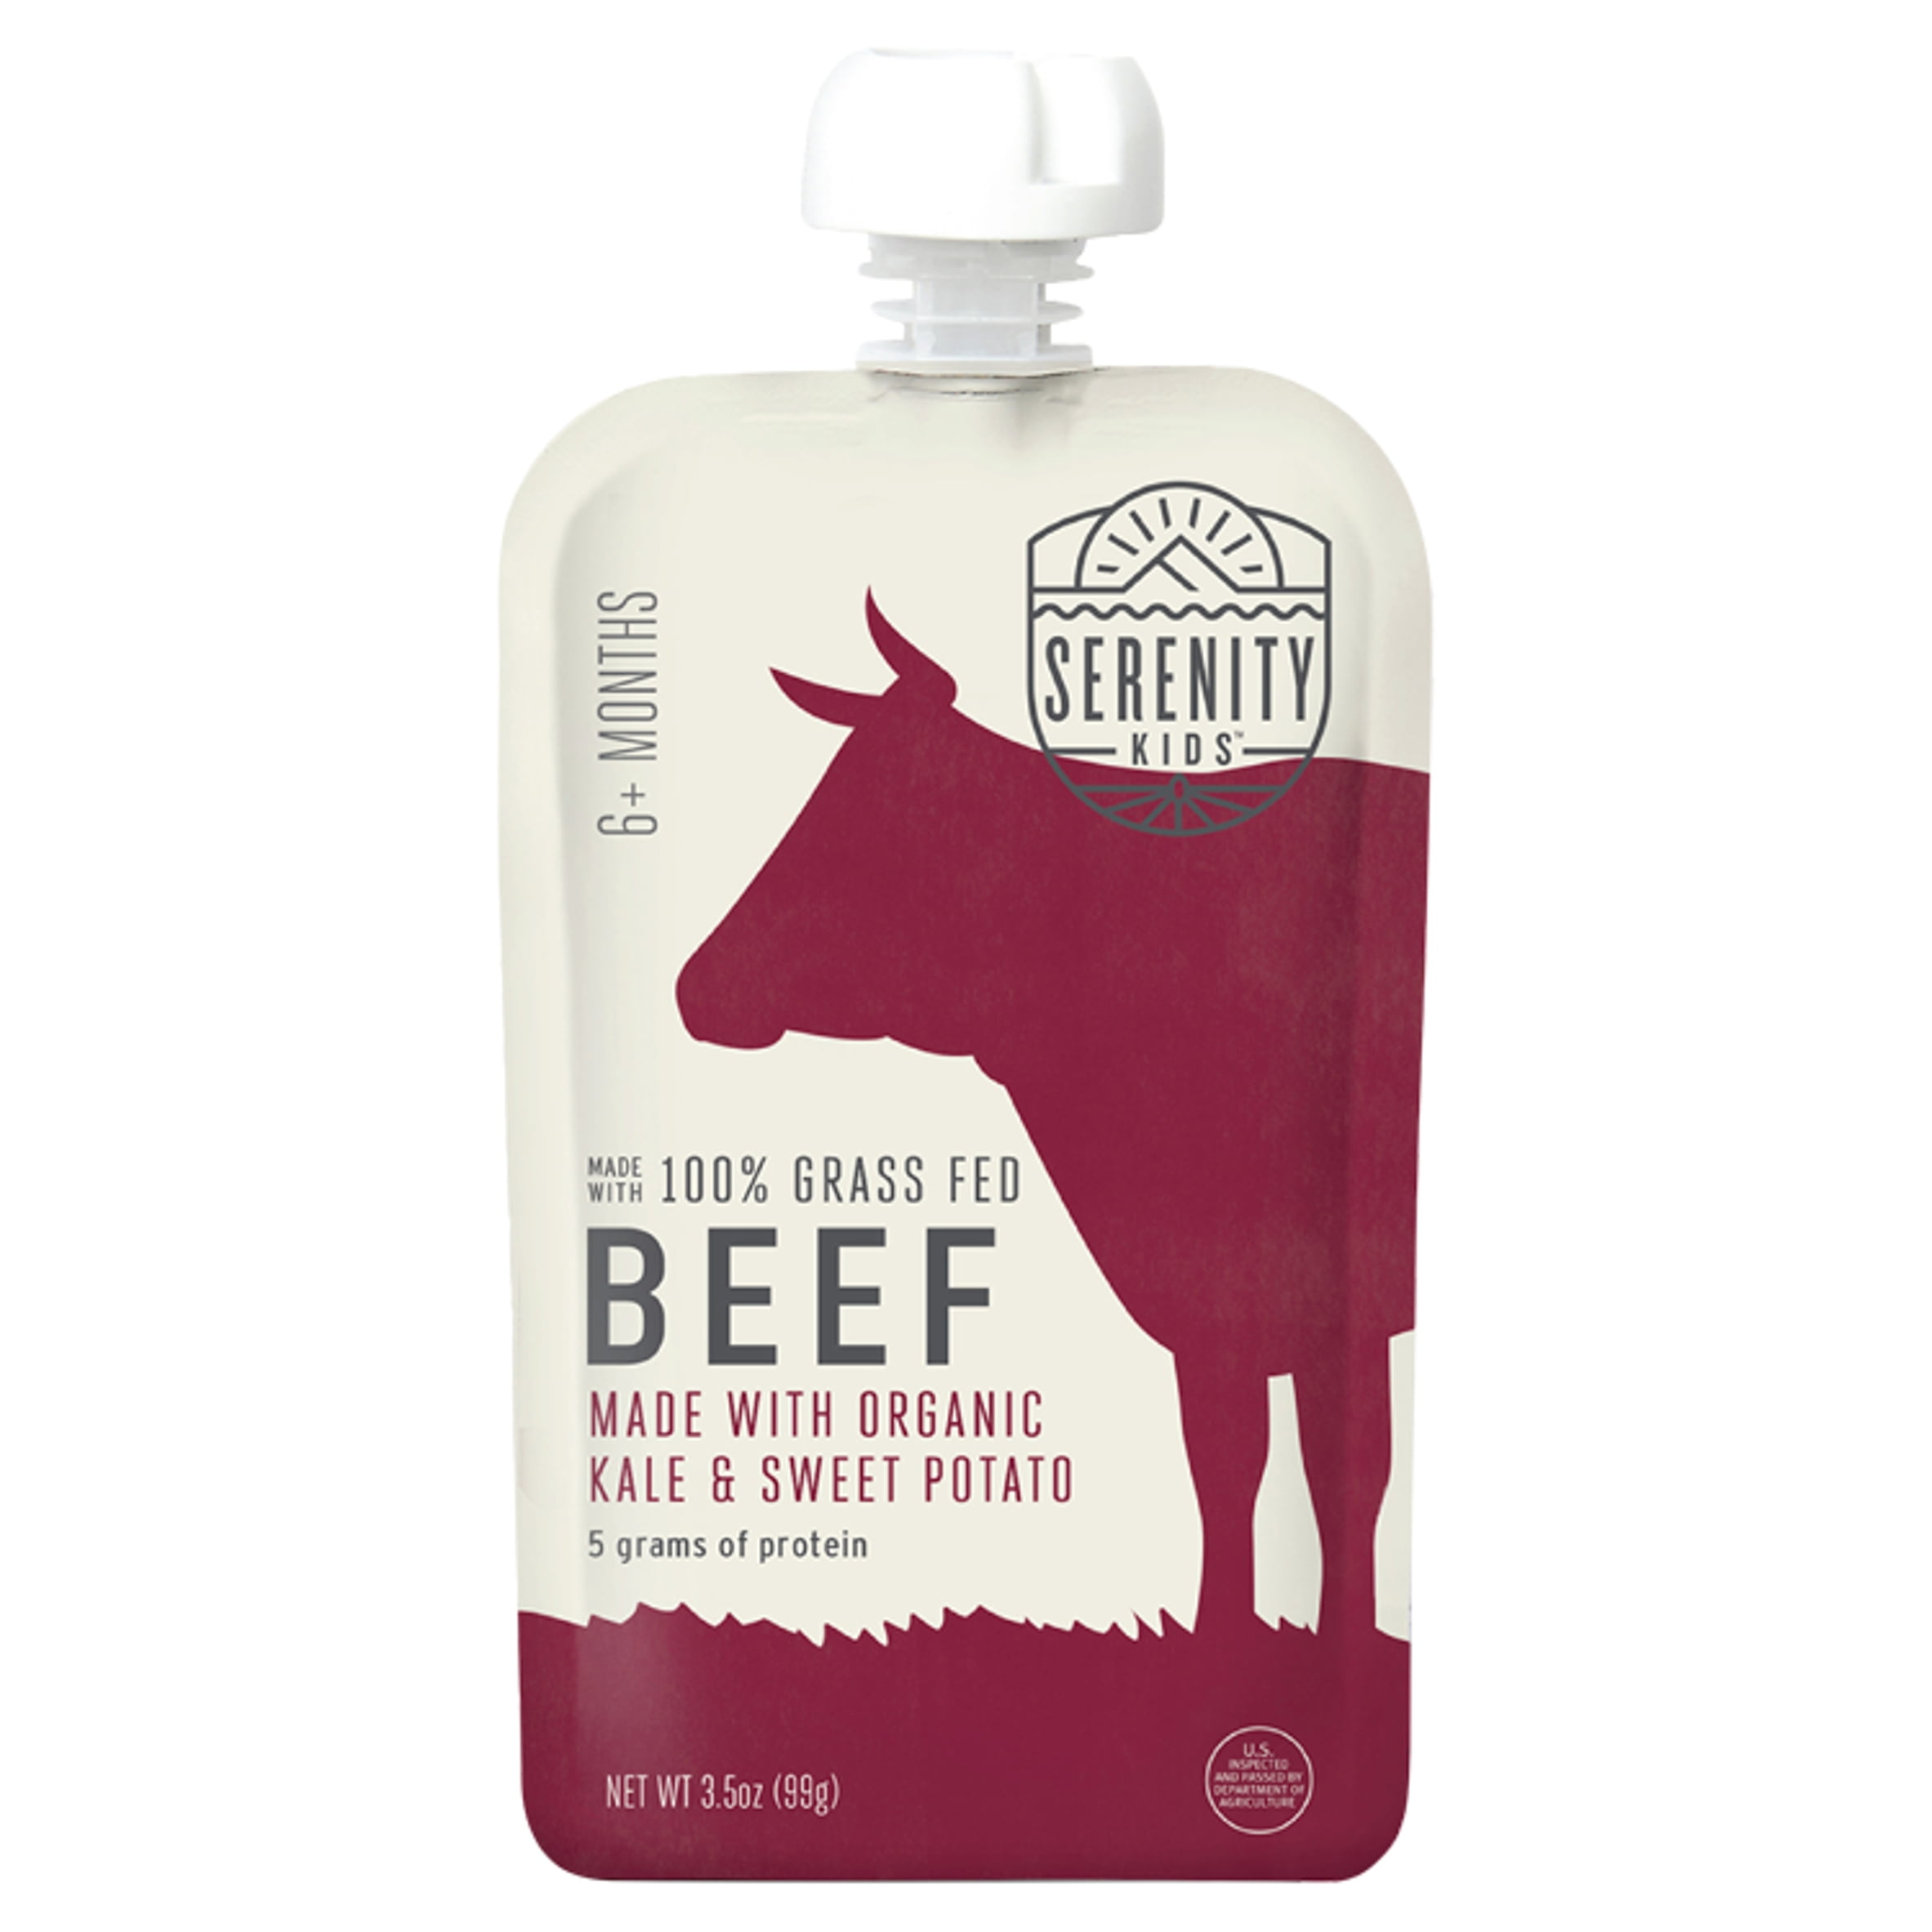 Serenity Kids Organic Stage 2 Baby Food, Grass Fed Beef with Kale and Sweet Potato, 3.5 oz Pouch